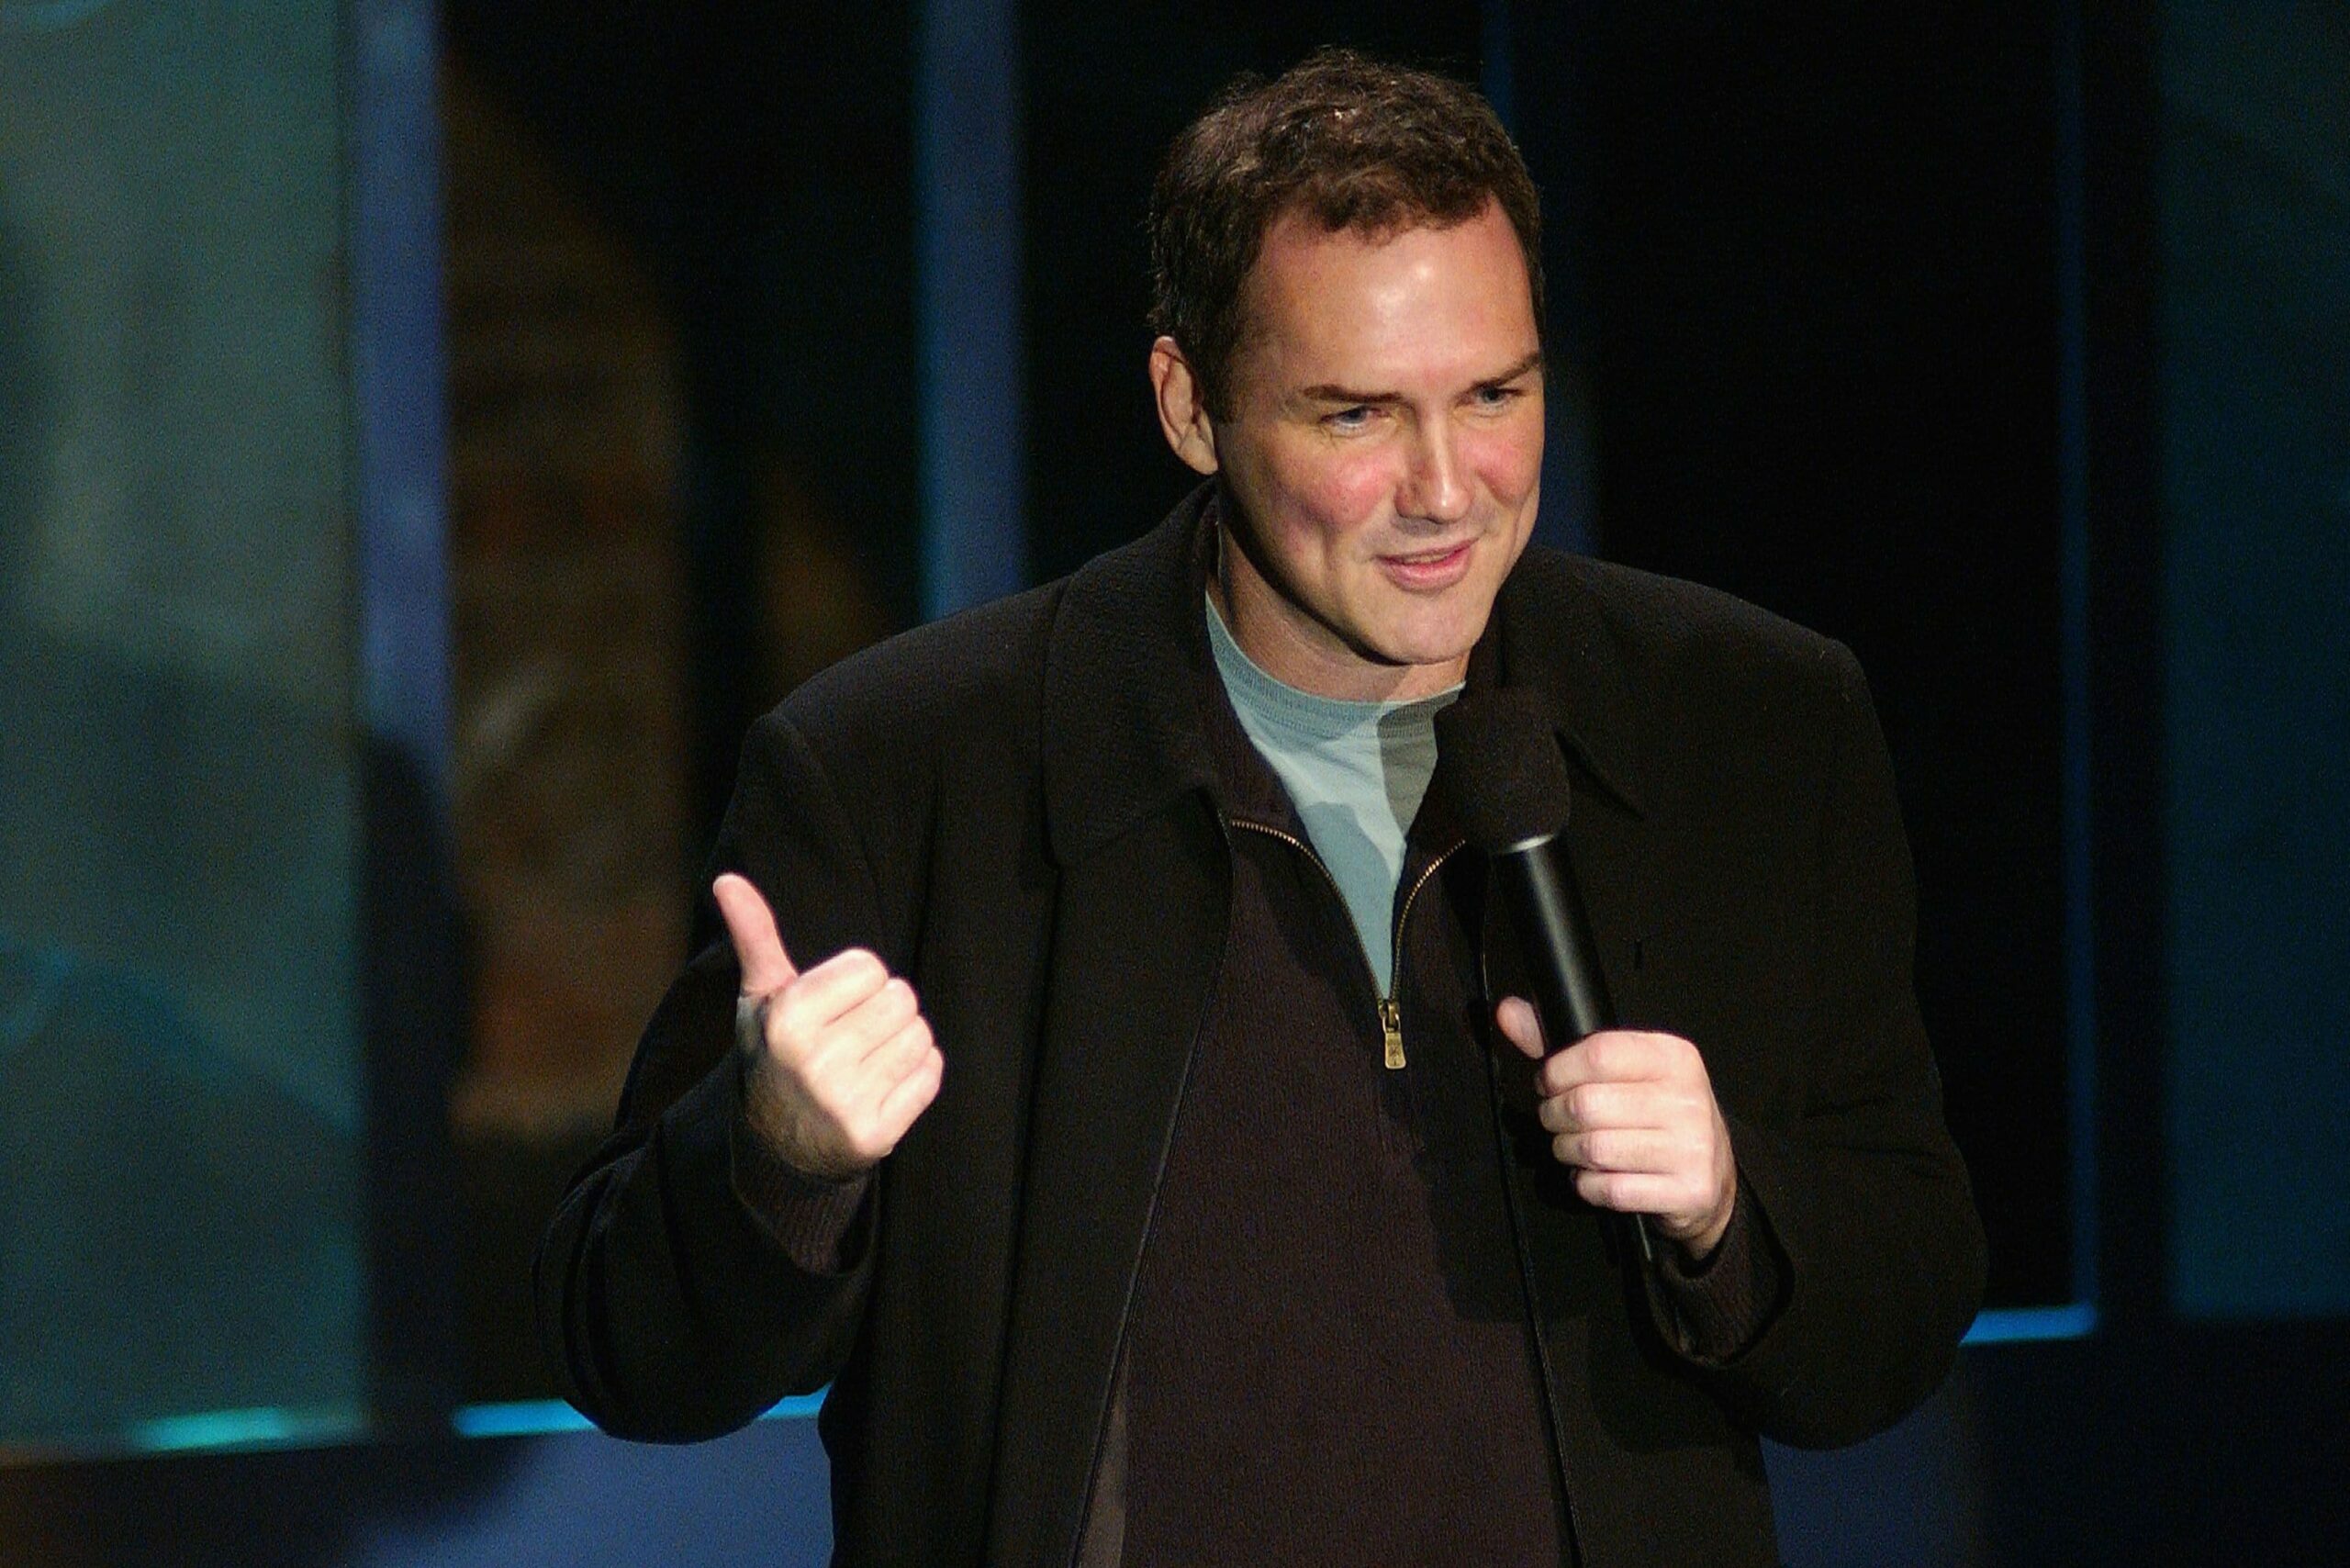 Comedian Norm Macdonald dies at 61, see five (5) facts